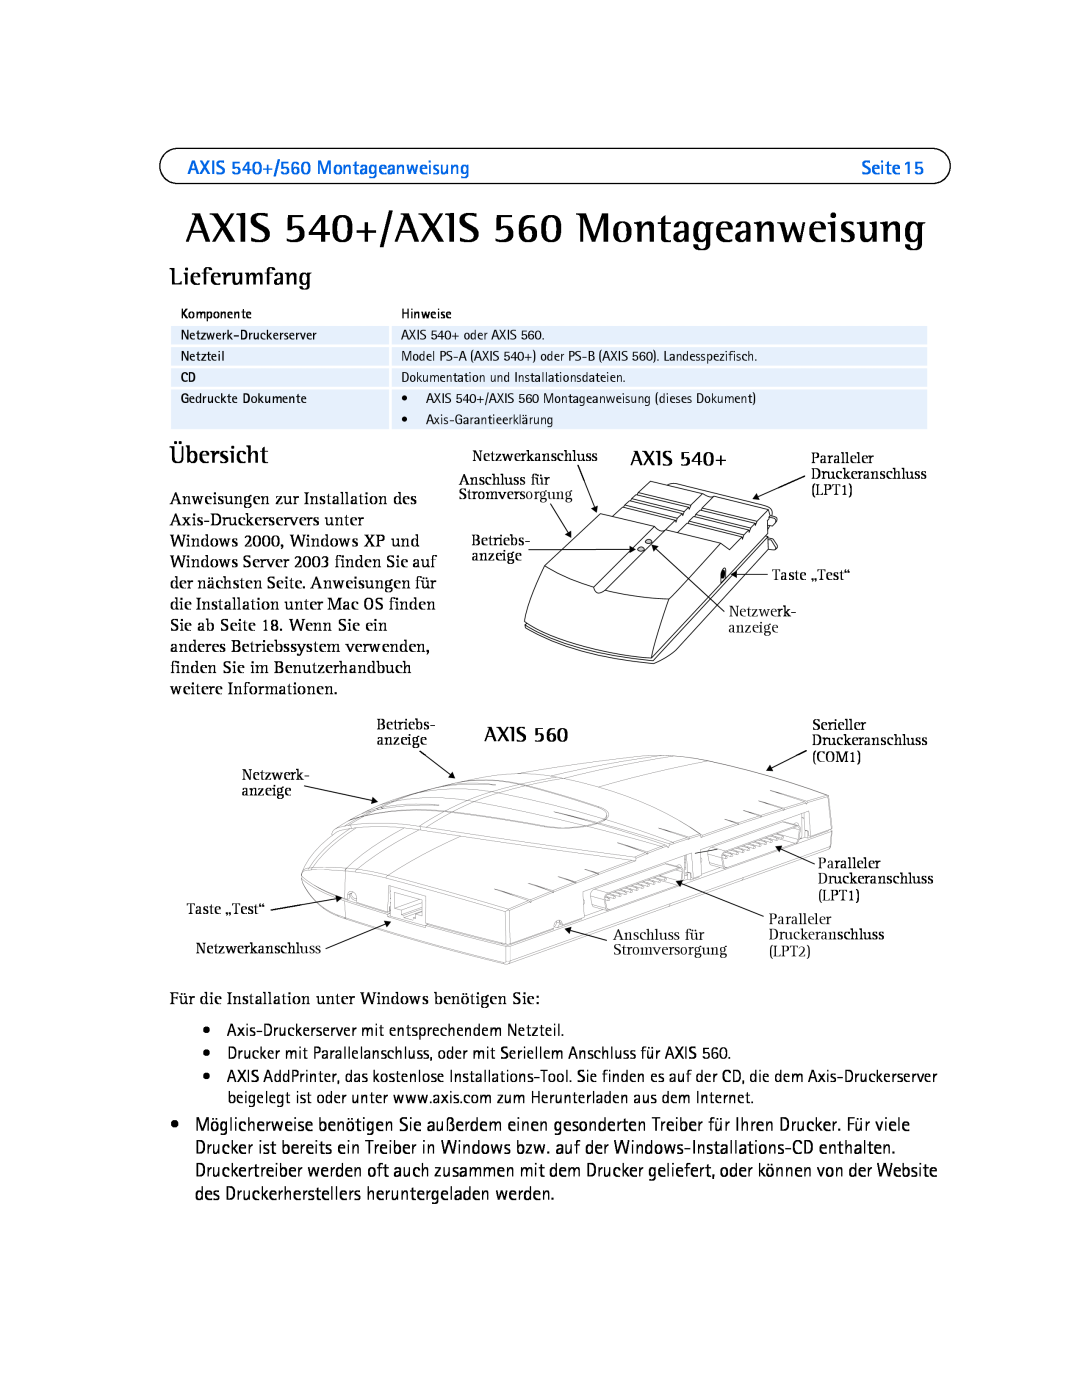 Axis Communications AXIS 540+/AXIS 560 Montageanweisung, Lieferumfang, Übersicht, AXIS 540+/560 Montageanweisung, Axis 